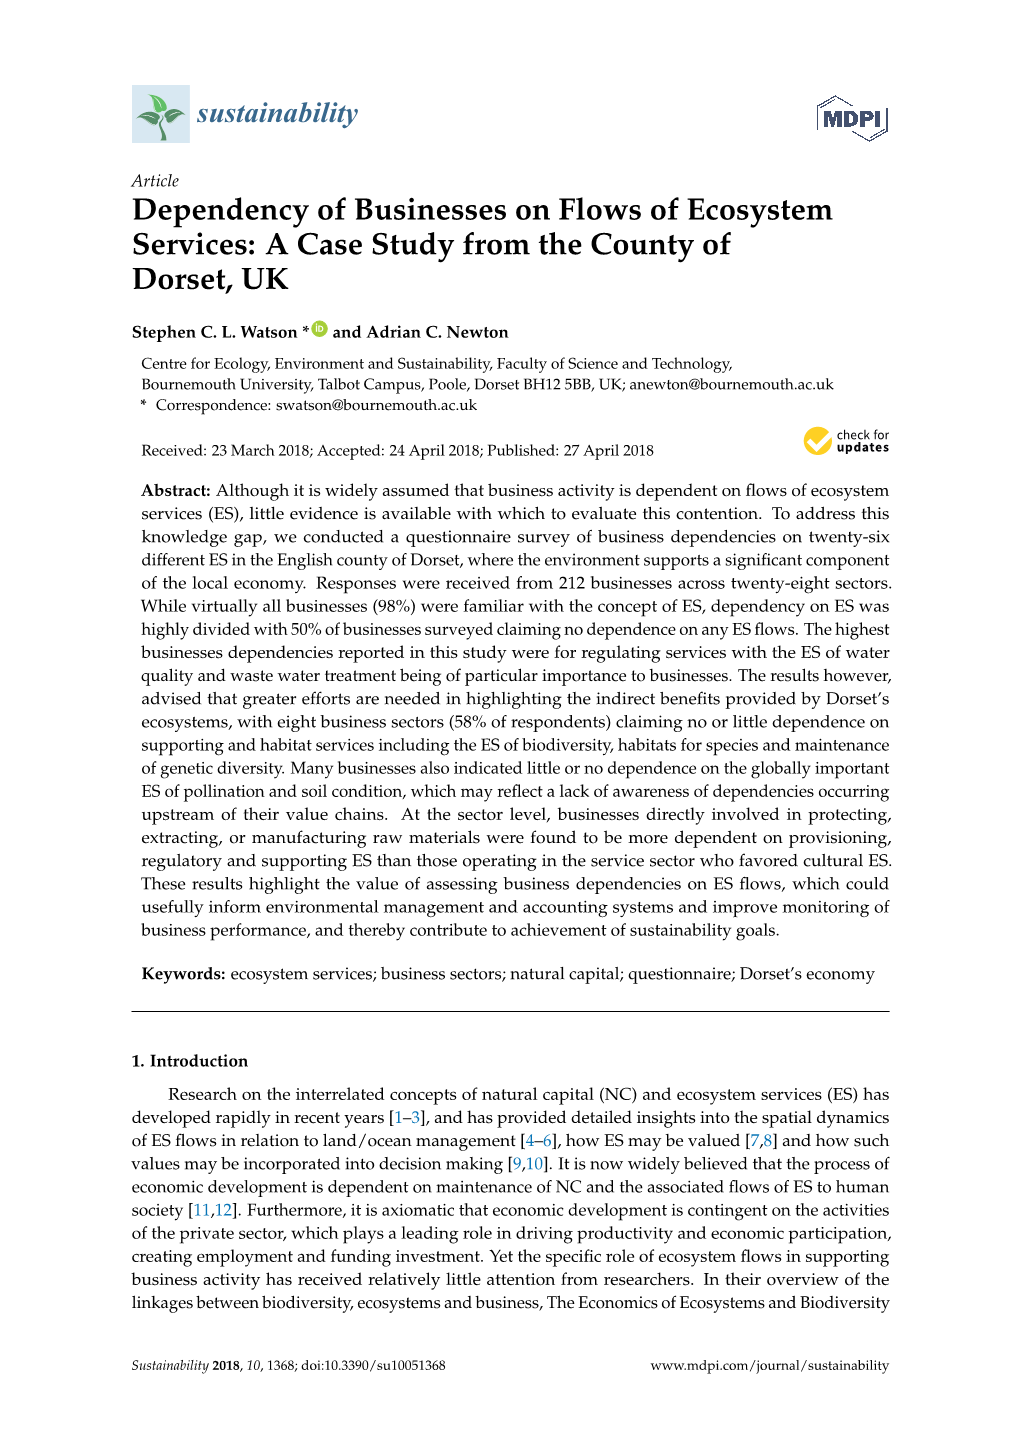 Dependency of Businesses on Flows of Ecosystem Services: a Case Study from the County of Dorset, UK